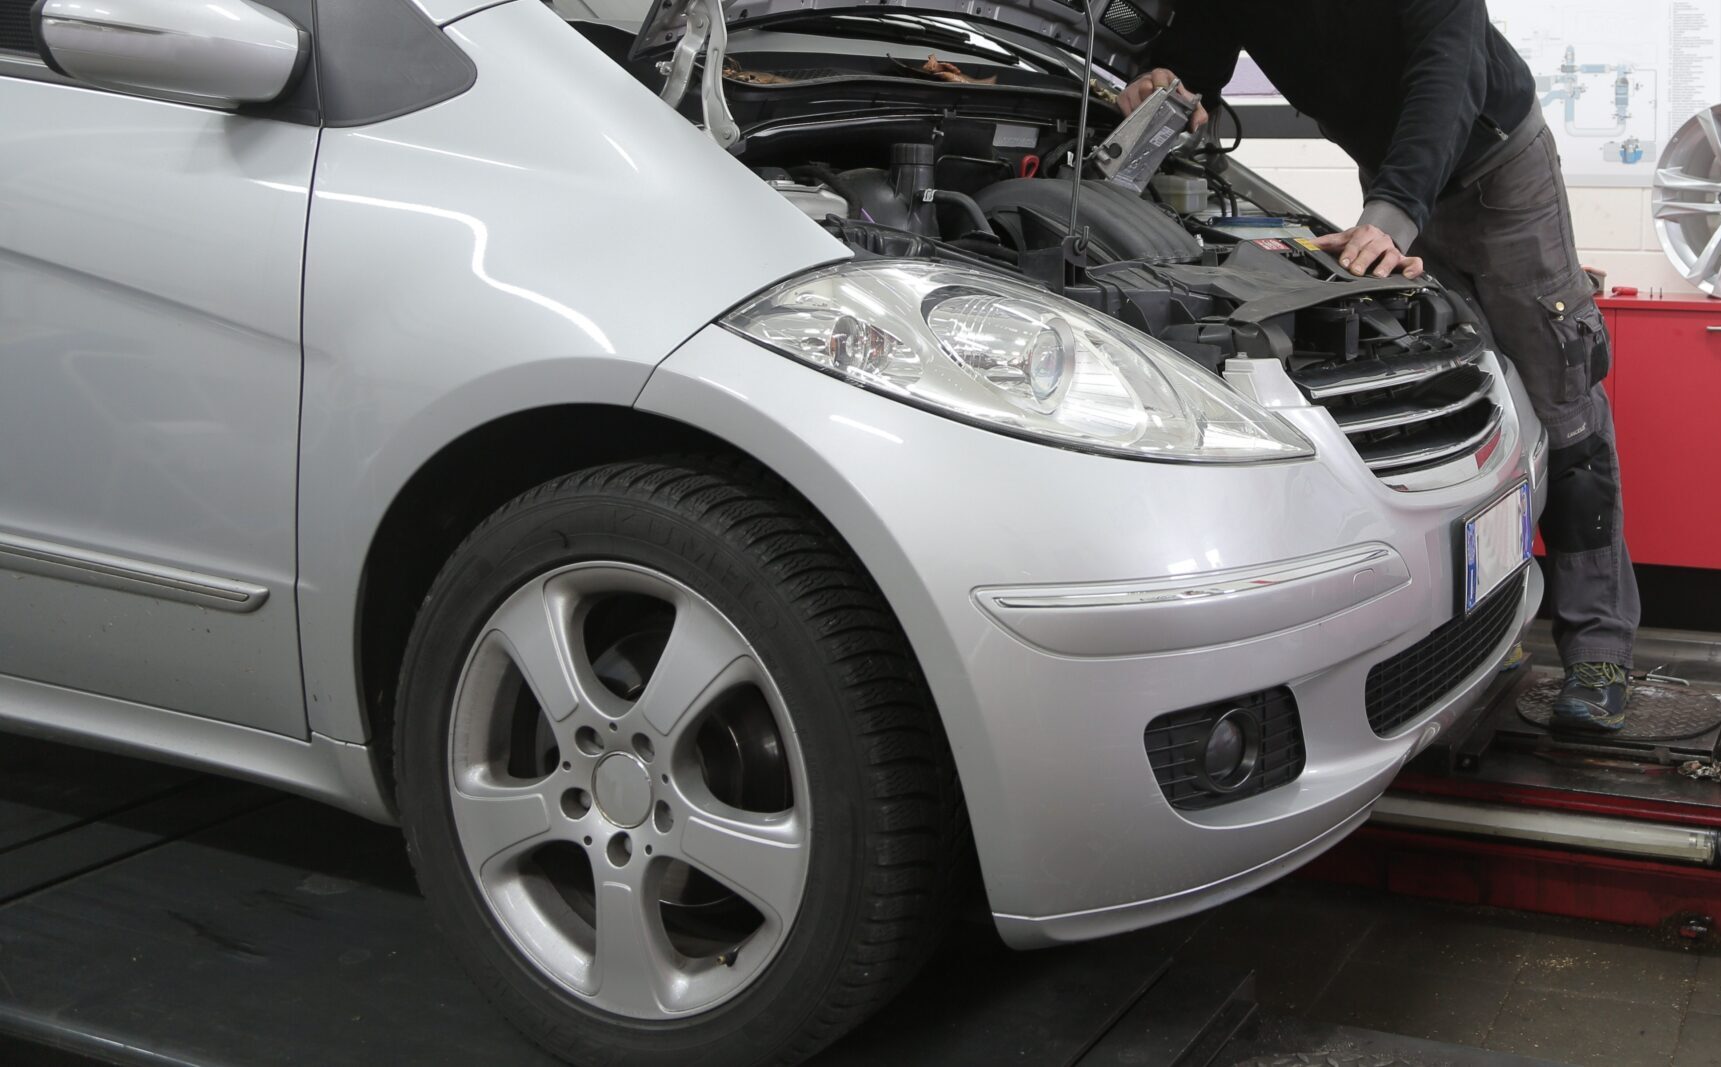 6 Crucial Car Maintenance Tips Every Car Owner Should Know